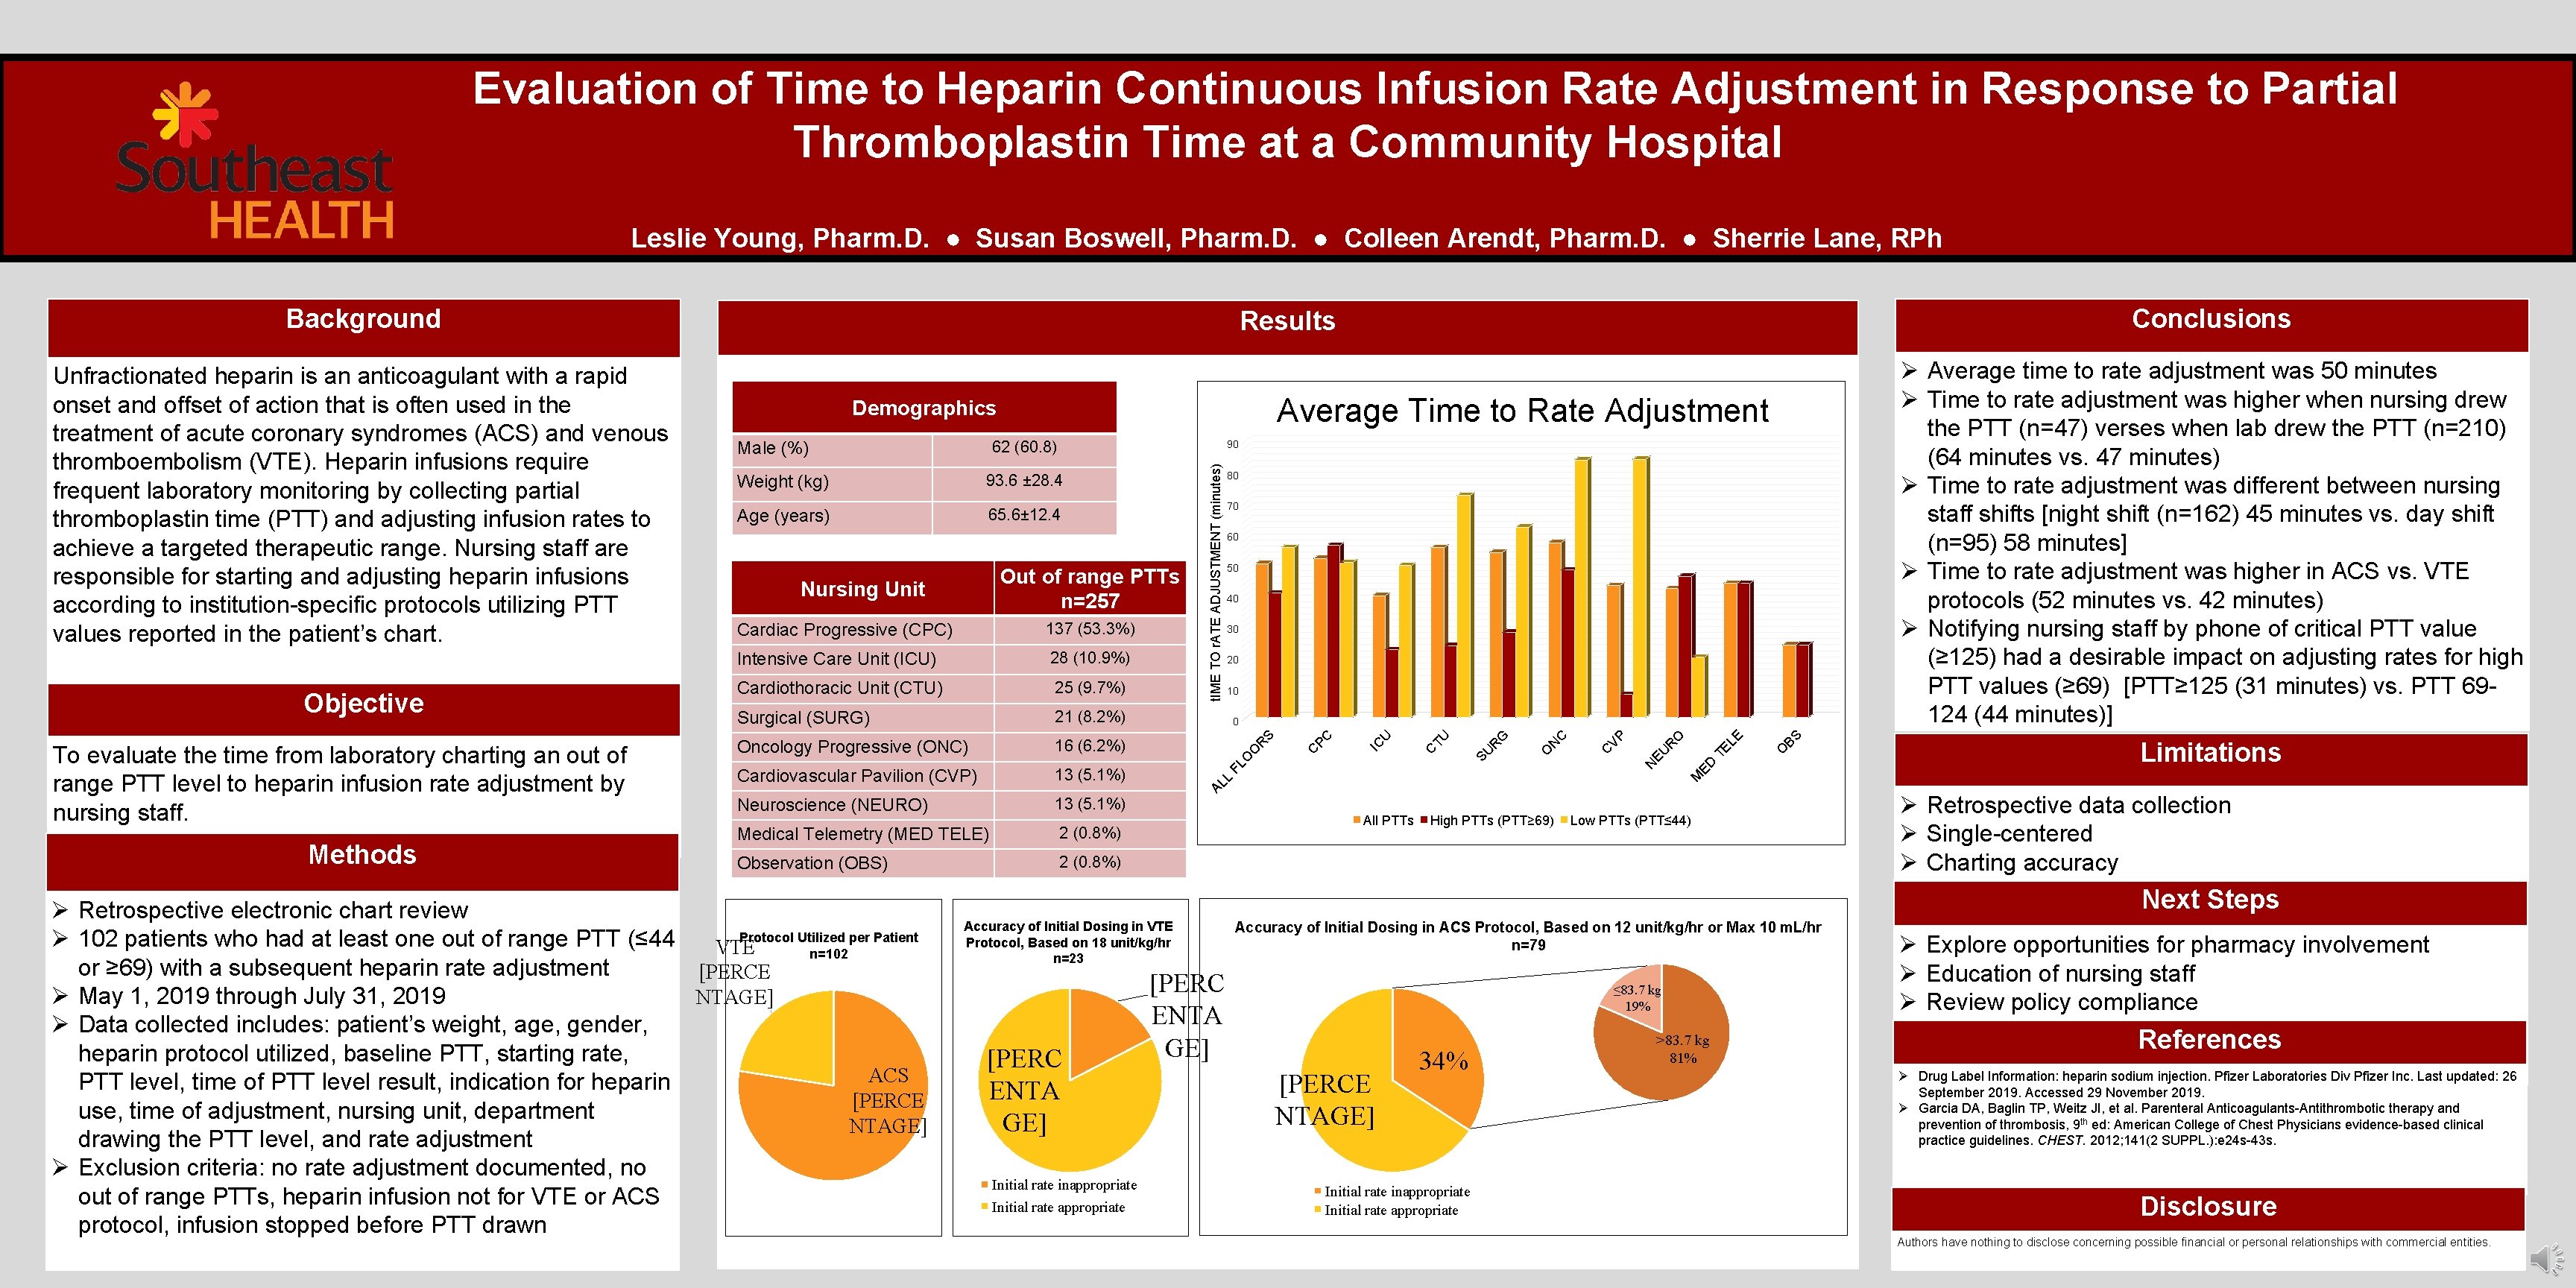 Evaluation of Time to Heparin Continuous Infusion Rate Adjustment in Response to Partial Thromboplastin